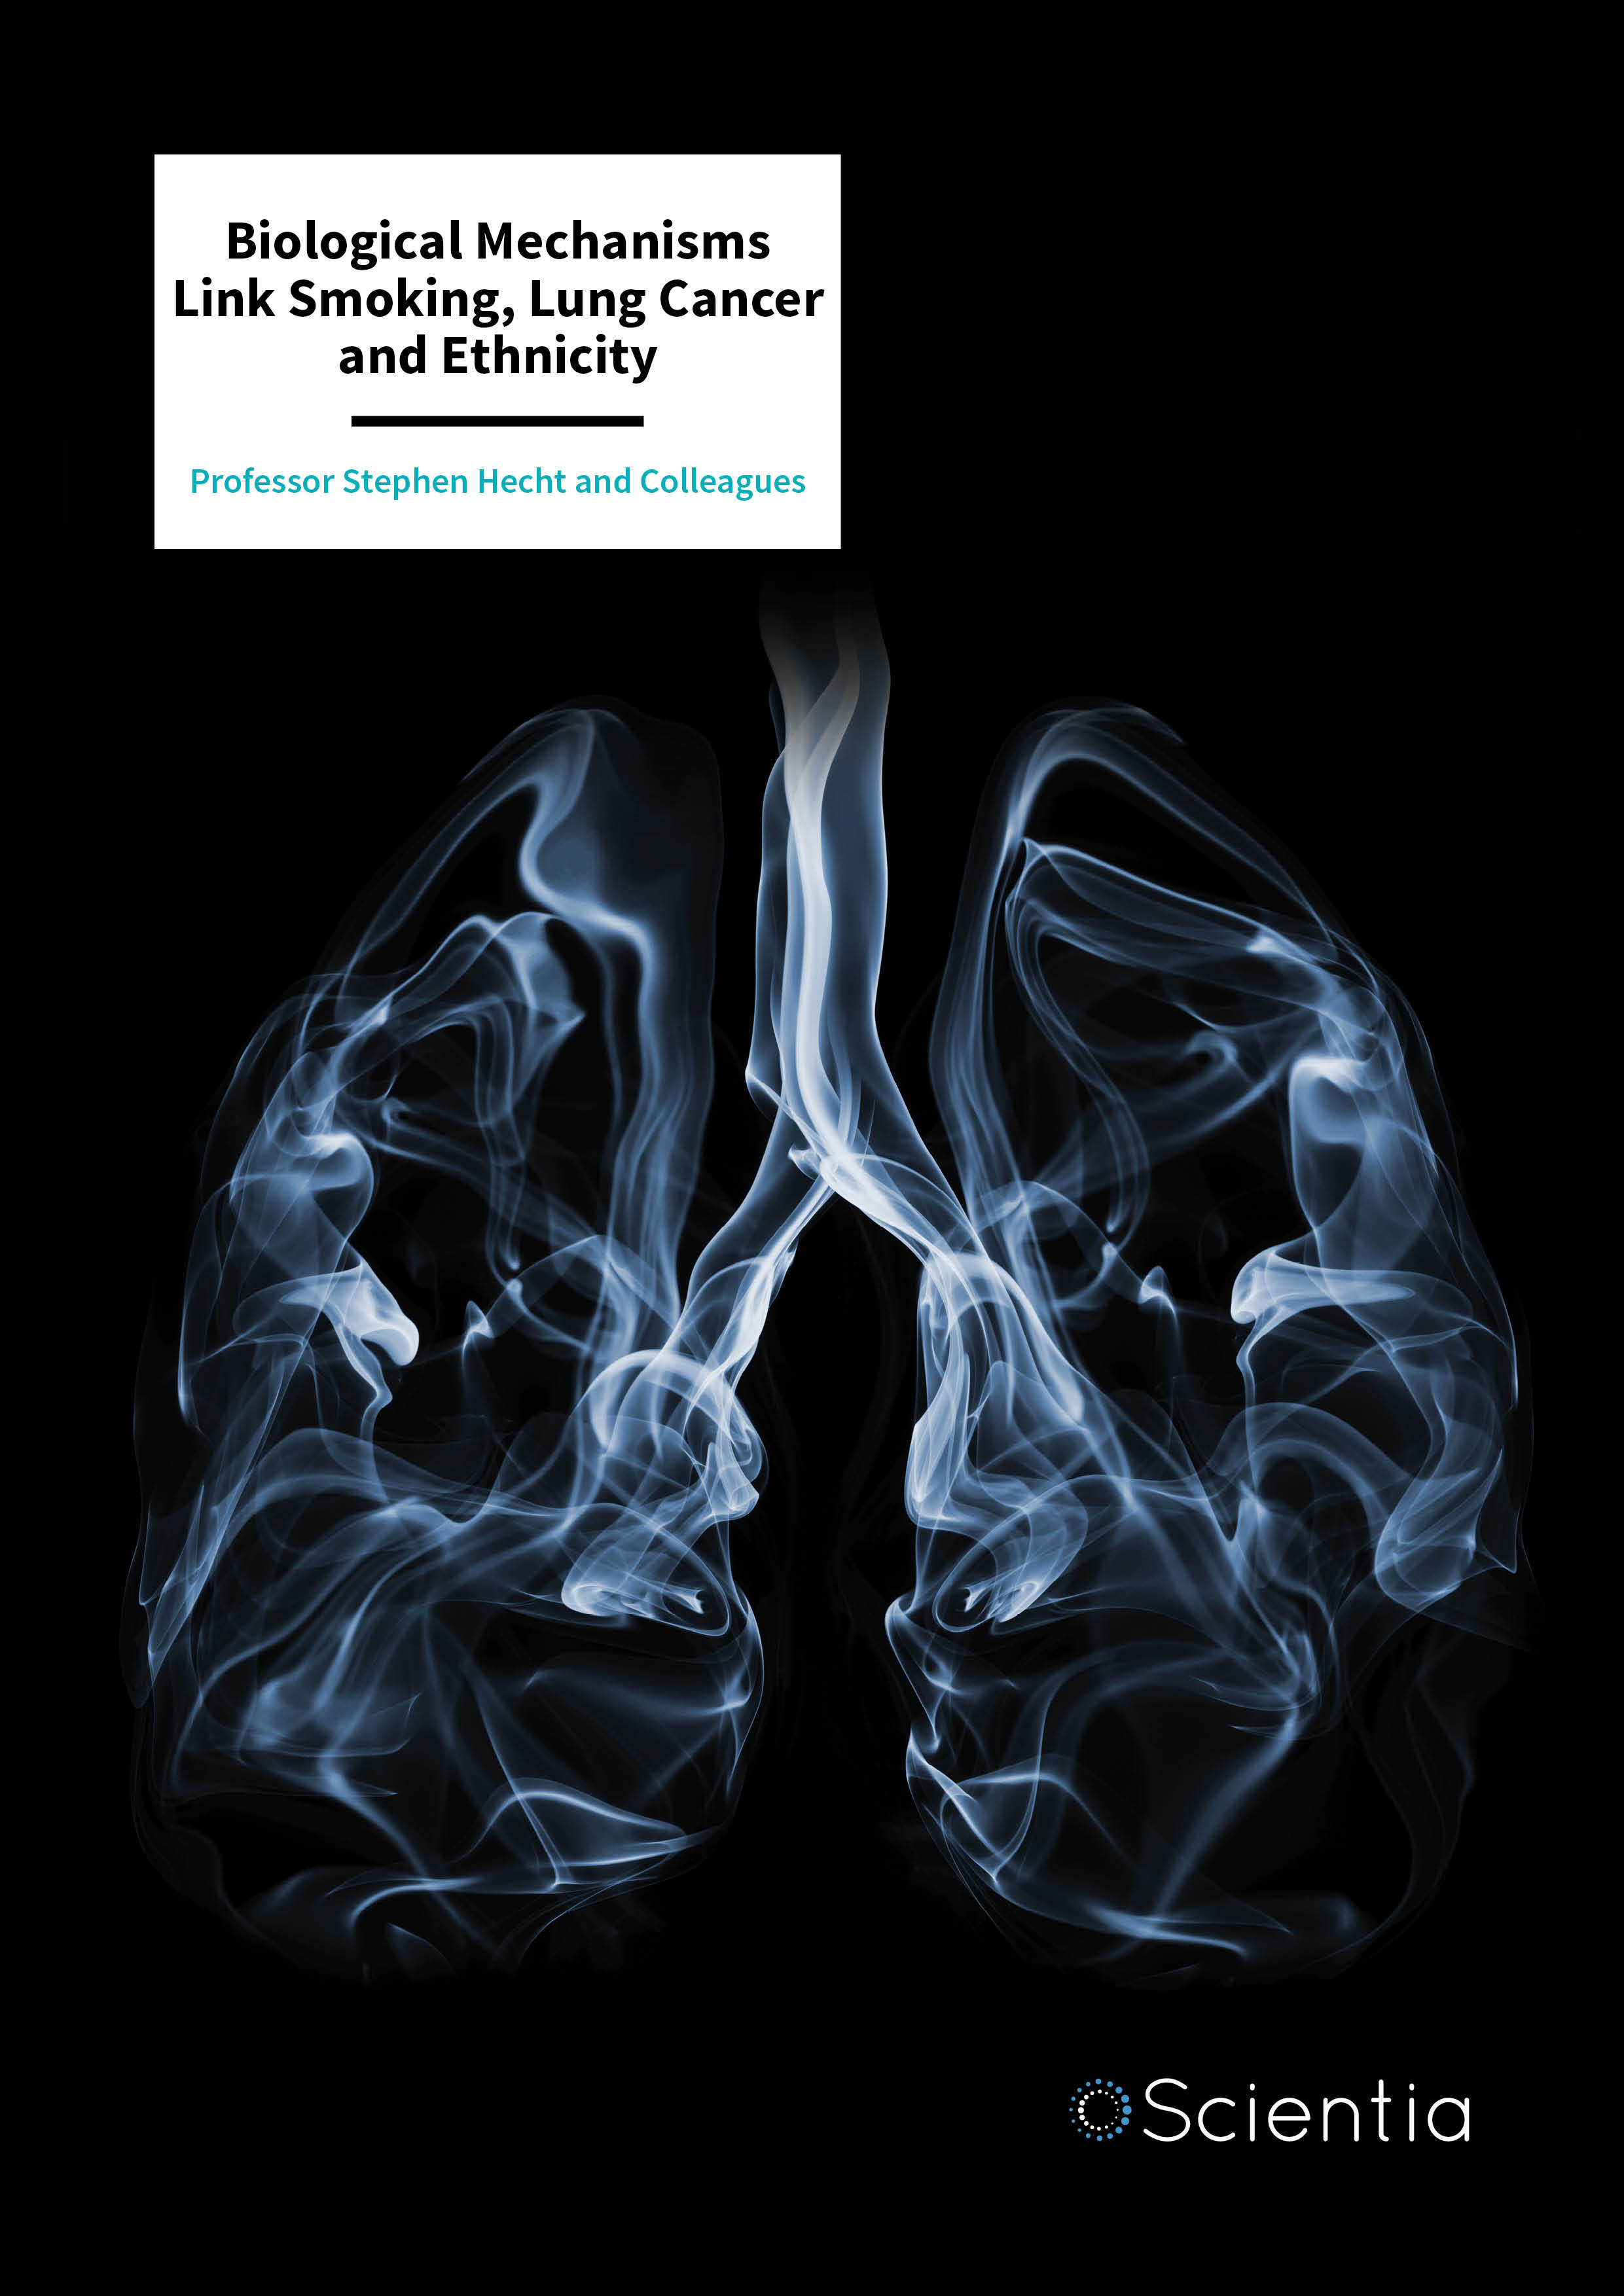 Dr Stephen Hecht – Biological Mechanisms Link Smoking, Lung Cancer and Ethnicity